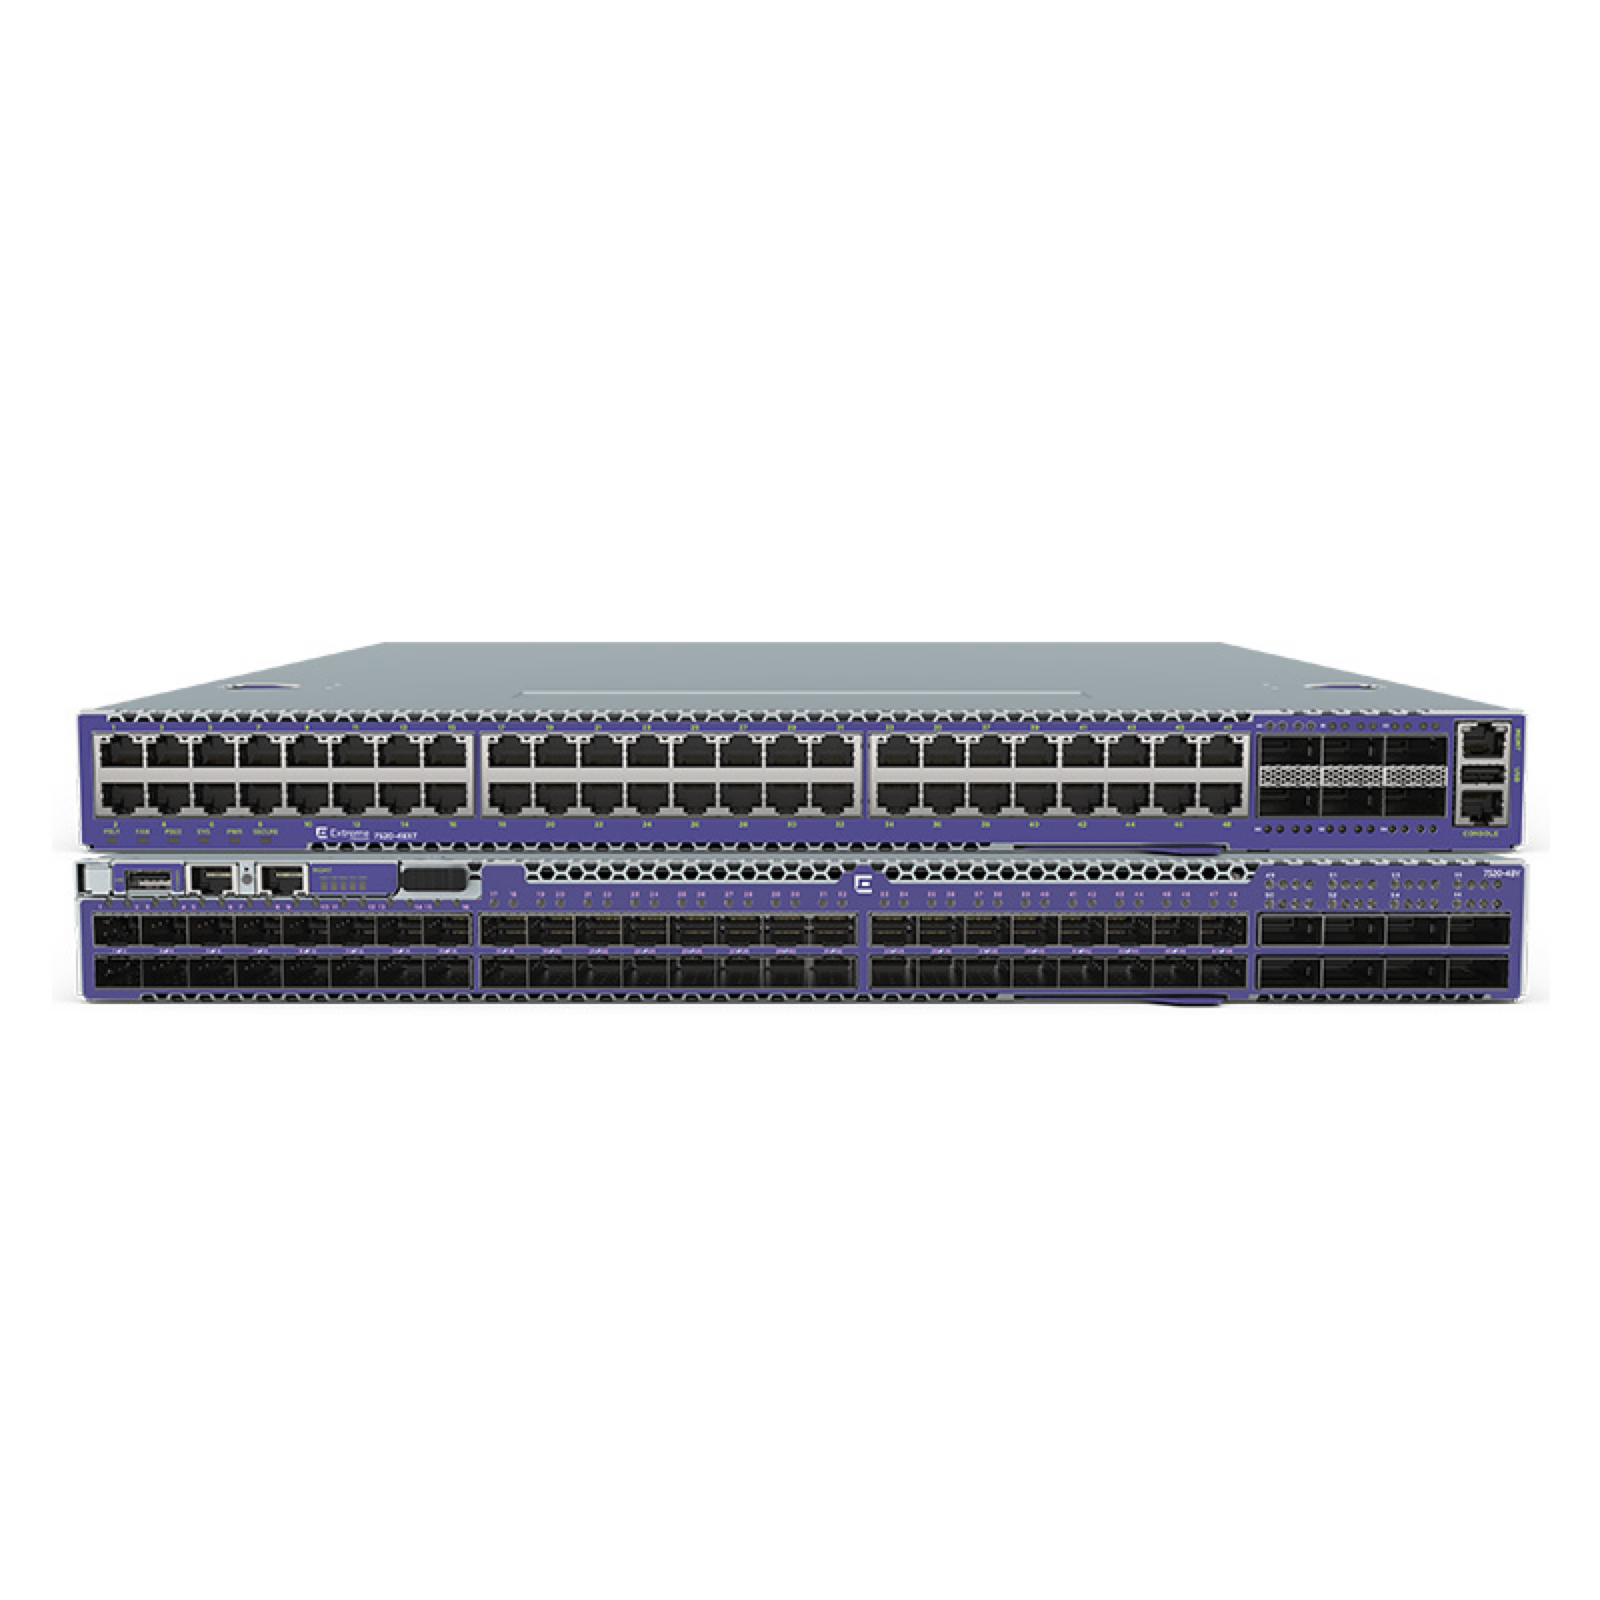 Get Extreme Networks 7520 Series Switch - Distributor in Malaysia